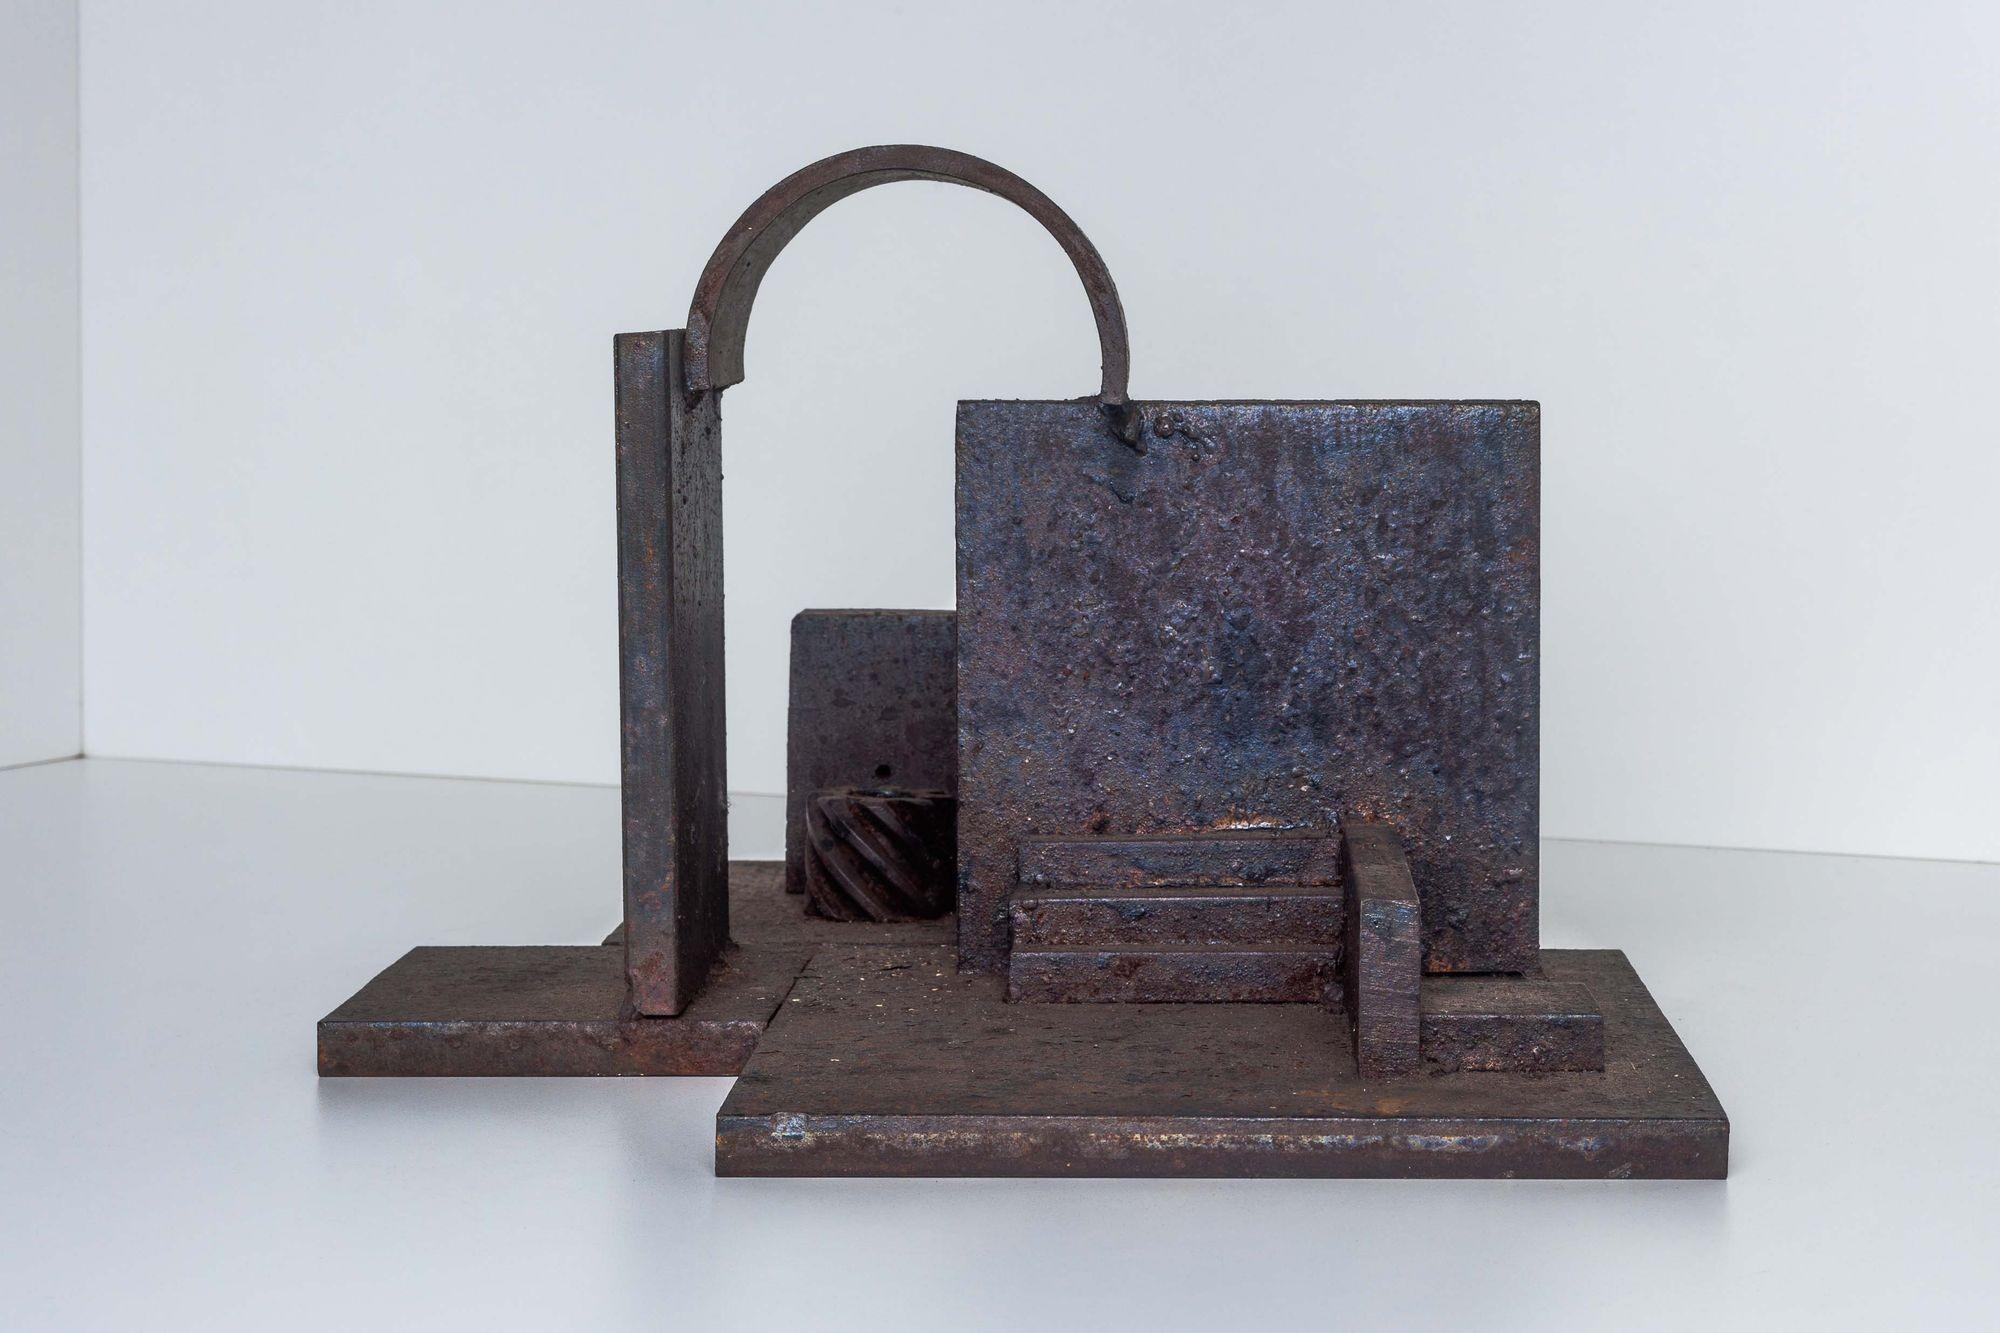 Tony Rosenthal Welded Steel Architectural Sculpture
Untitled. Welded steel sculpture with oxidized surface finish composed of architectural elements, unsigned, Circa 1980.
From The Estate Collection of Tony Rosenthal.

This piece comes with a